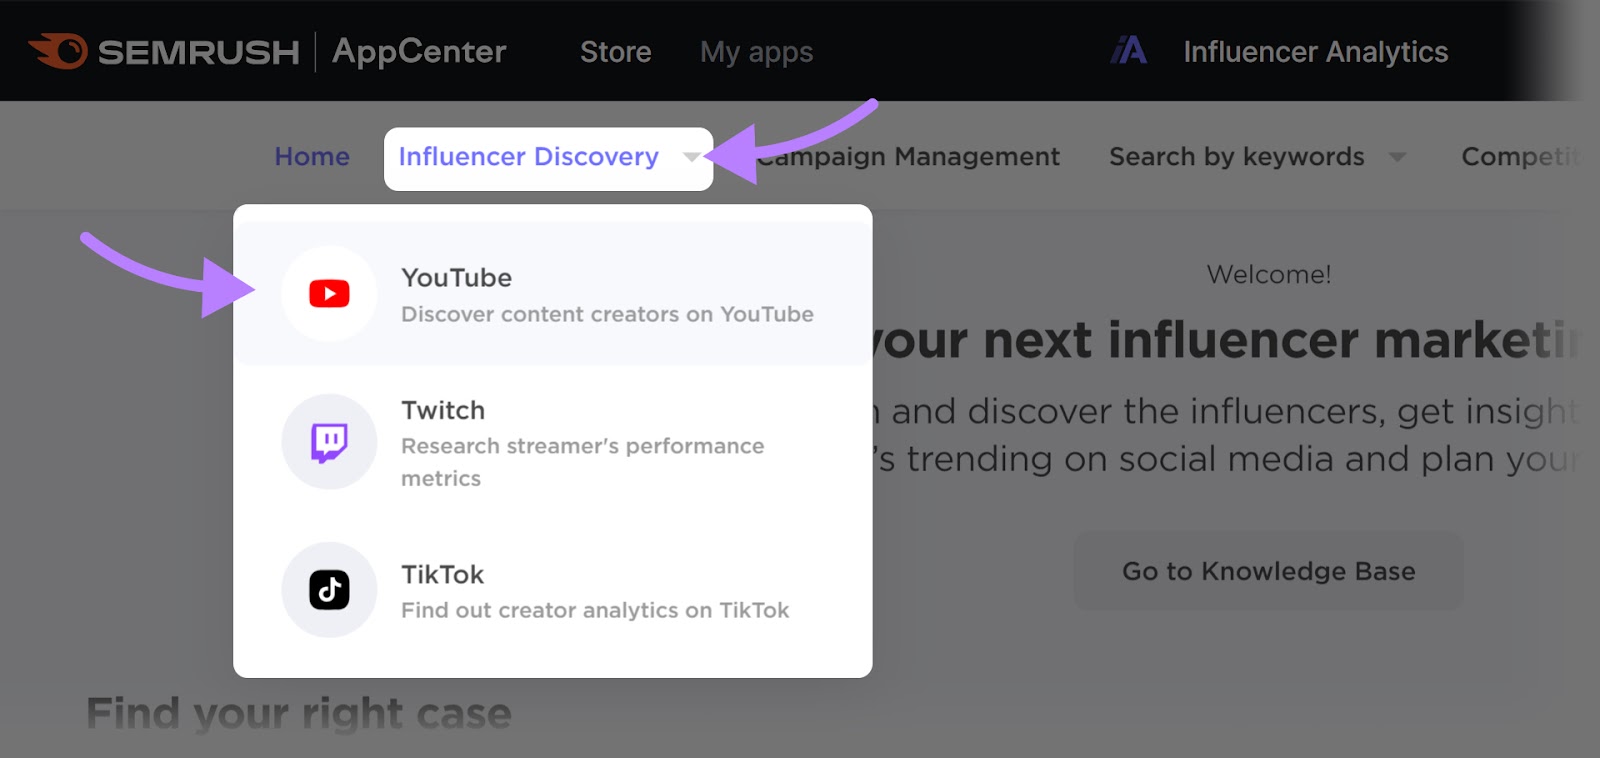 “Youtube" selected from the “Influencer Discovery" drop-down menu